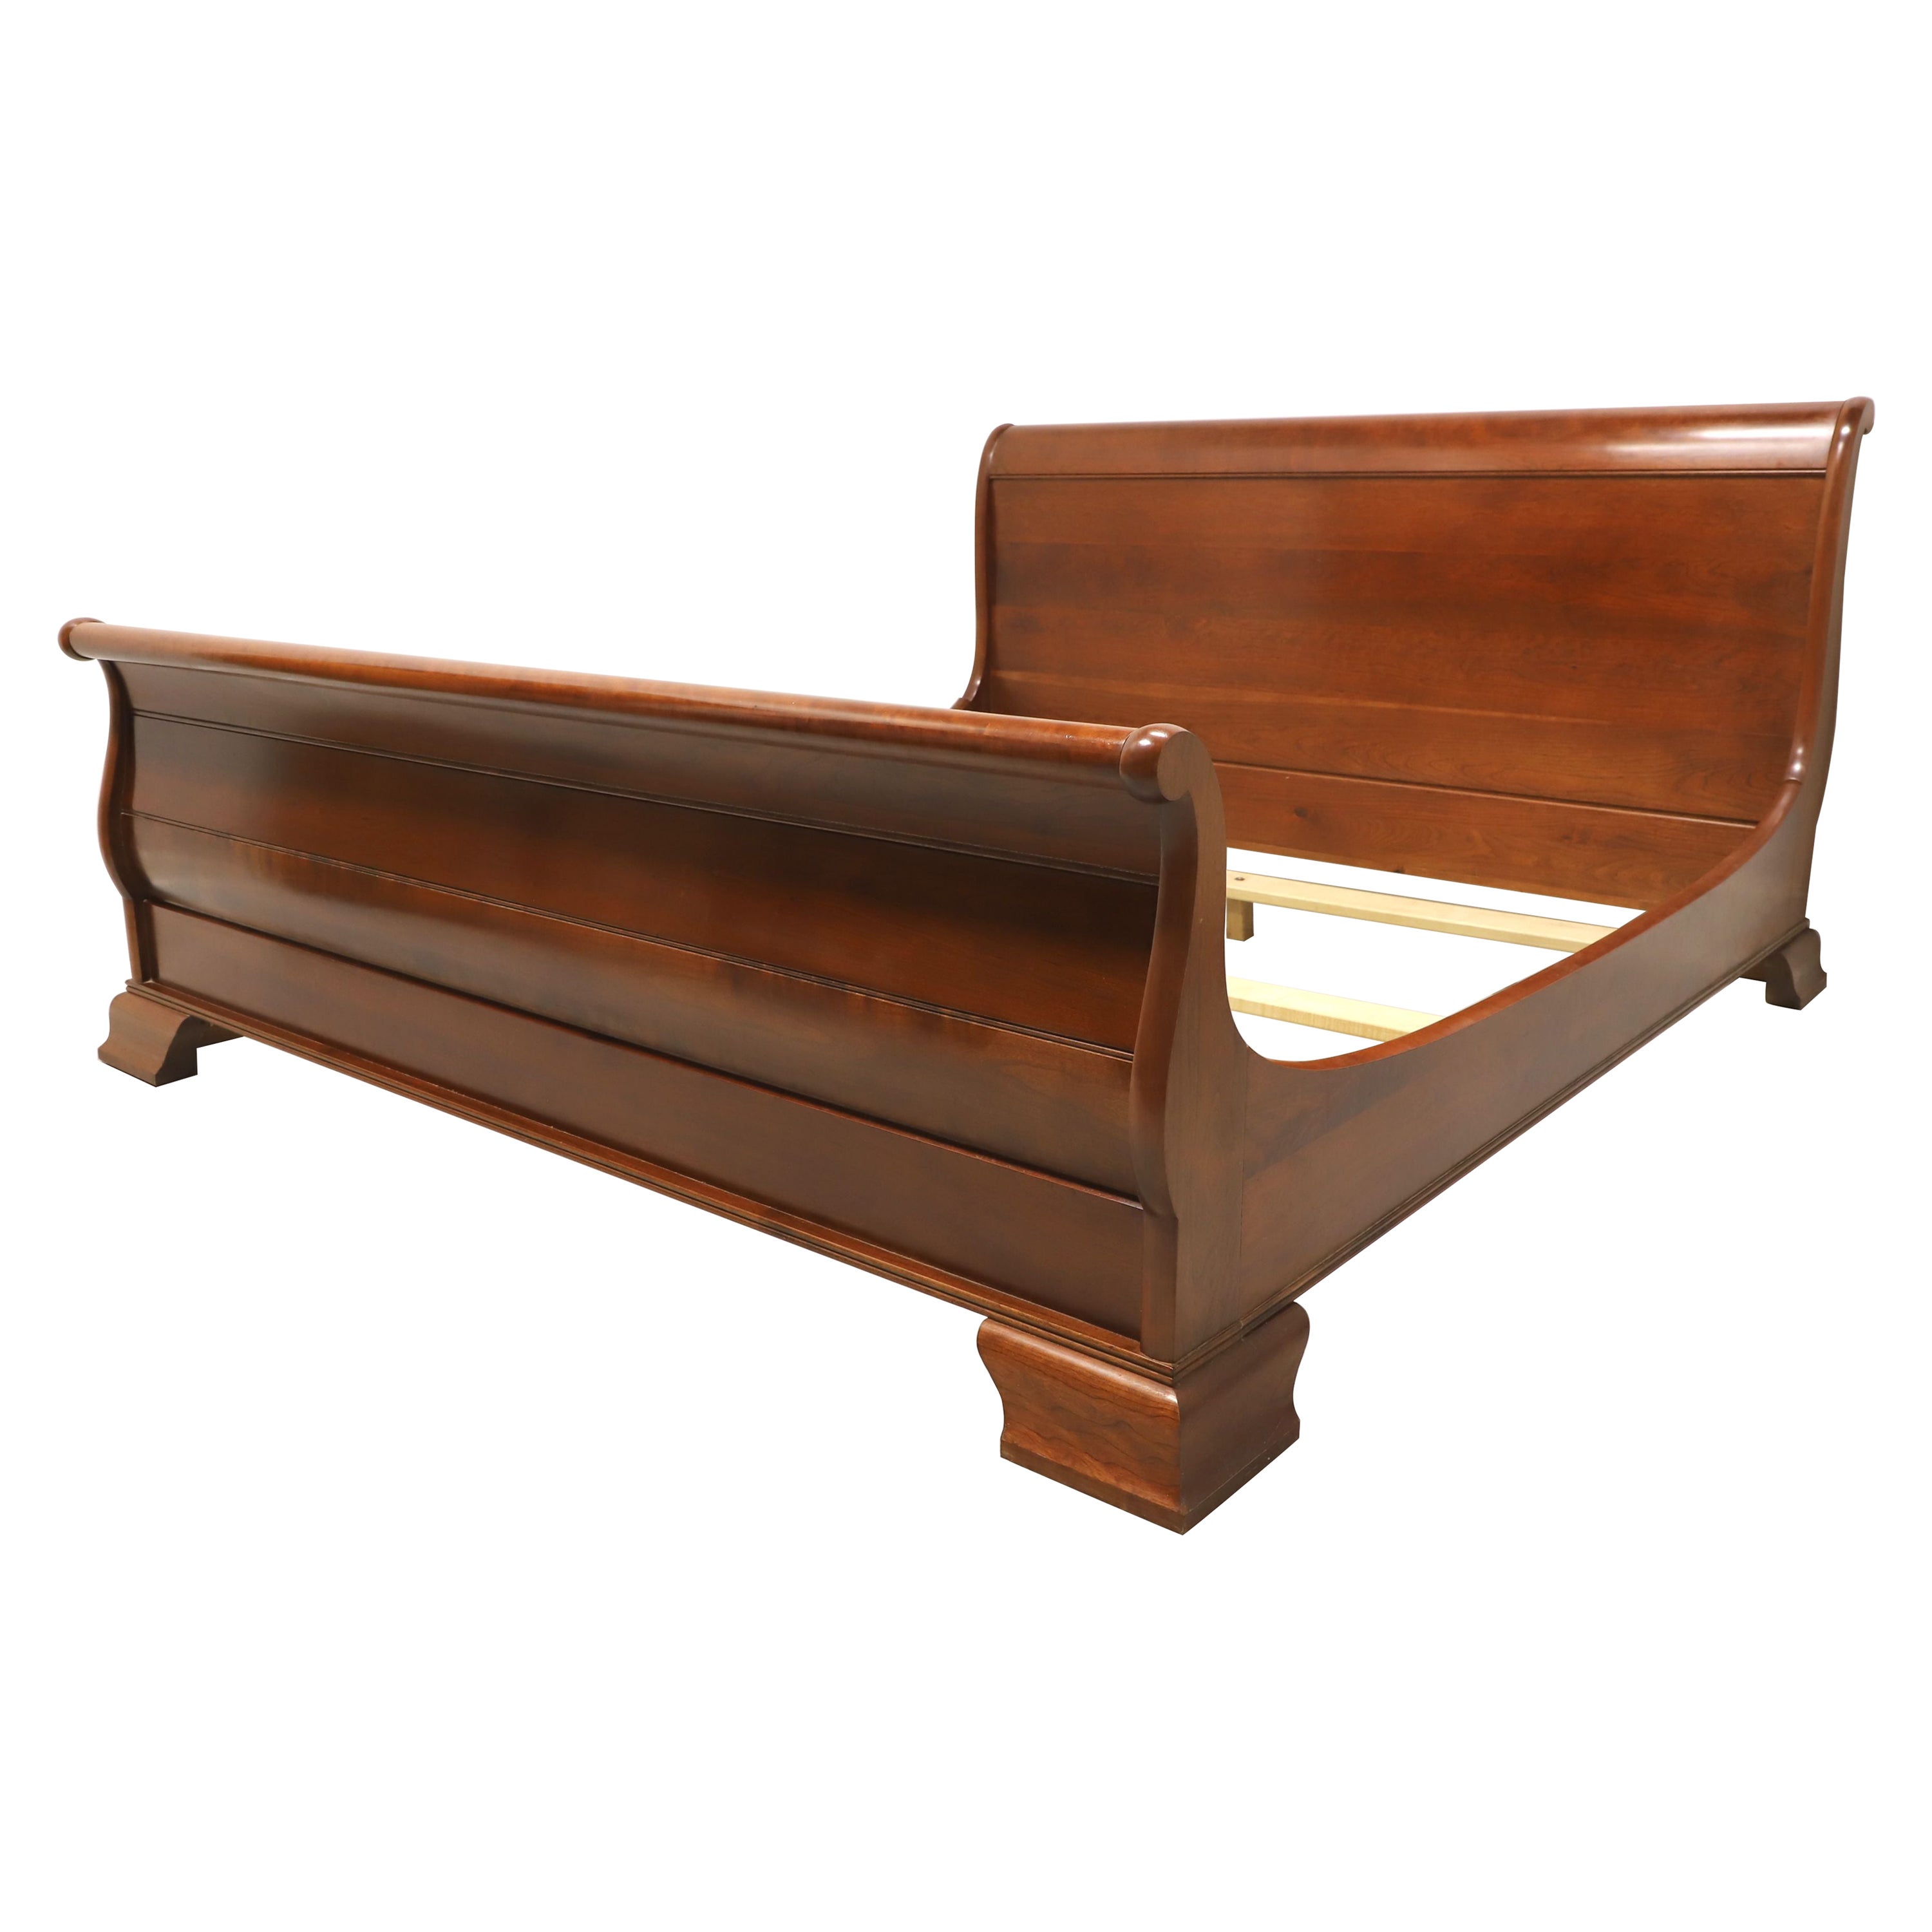 STICKLEY Solid Cherry Empire Style King Size Sleigh Bed